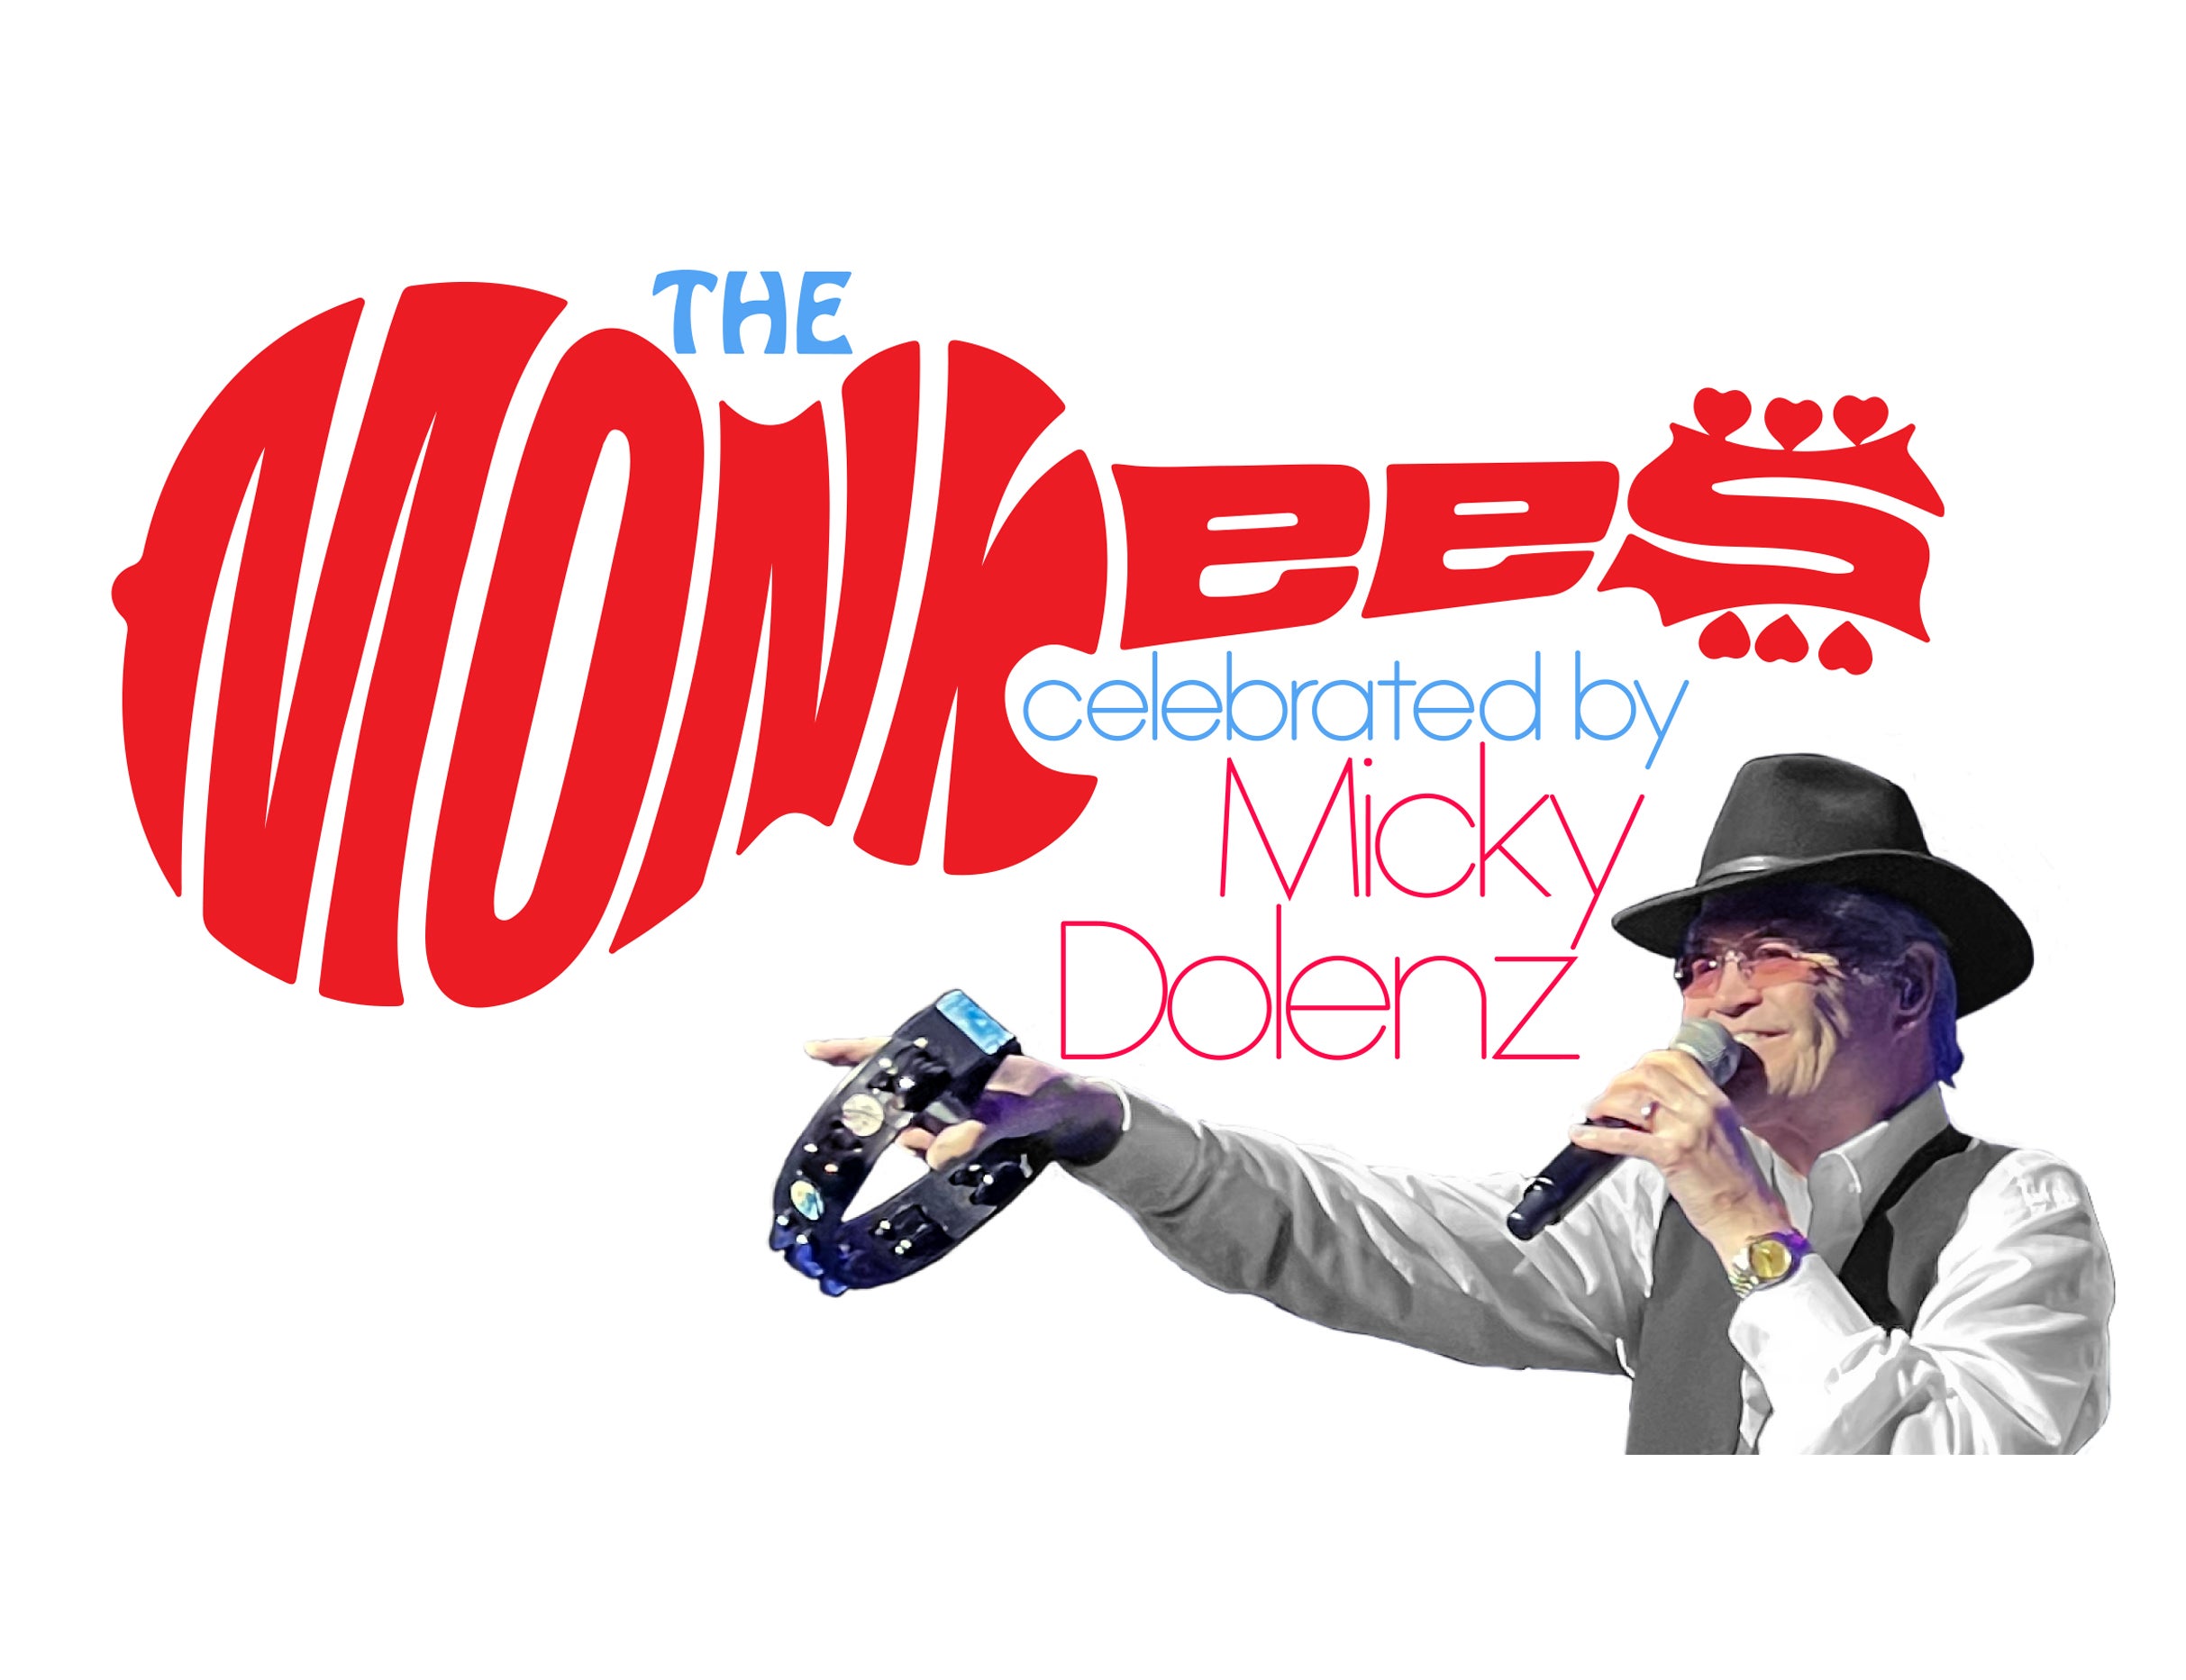 The Monkees Celebrated By Micky Dolenz in Temecula promo photo for Artist presale offer code